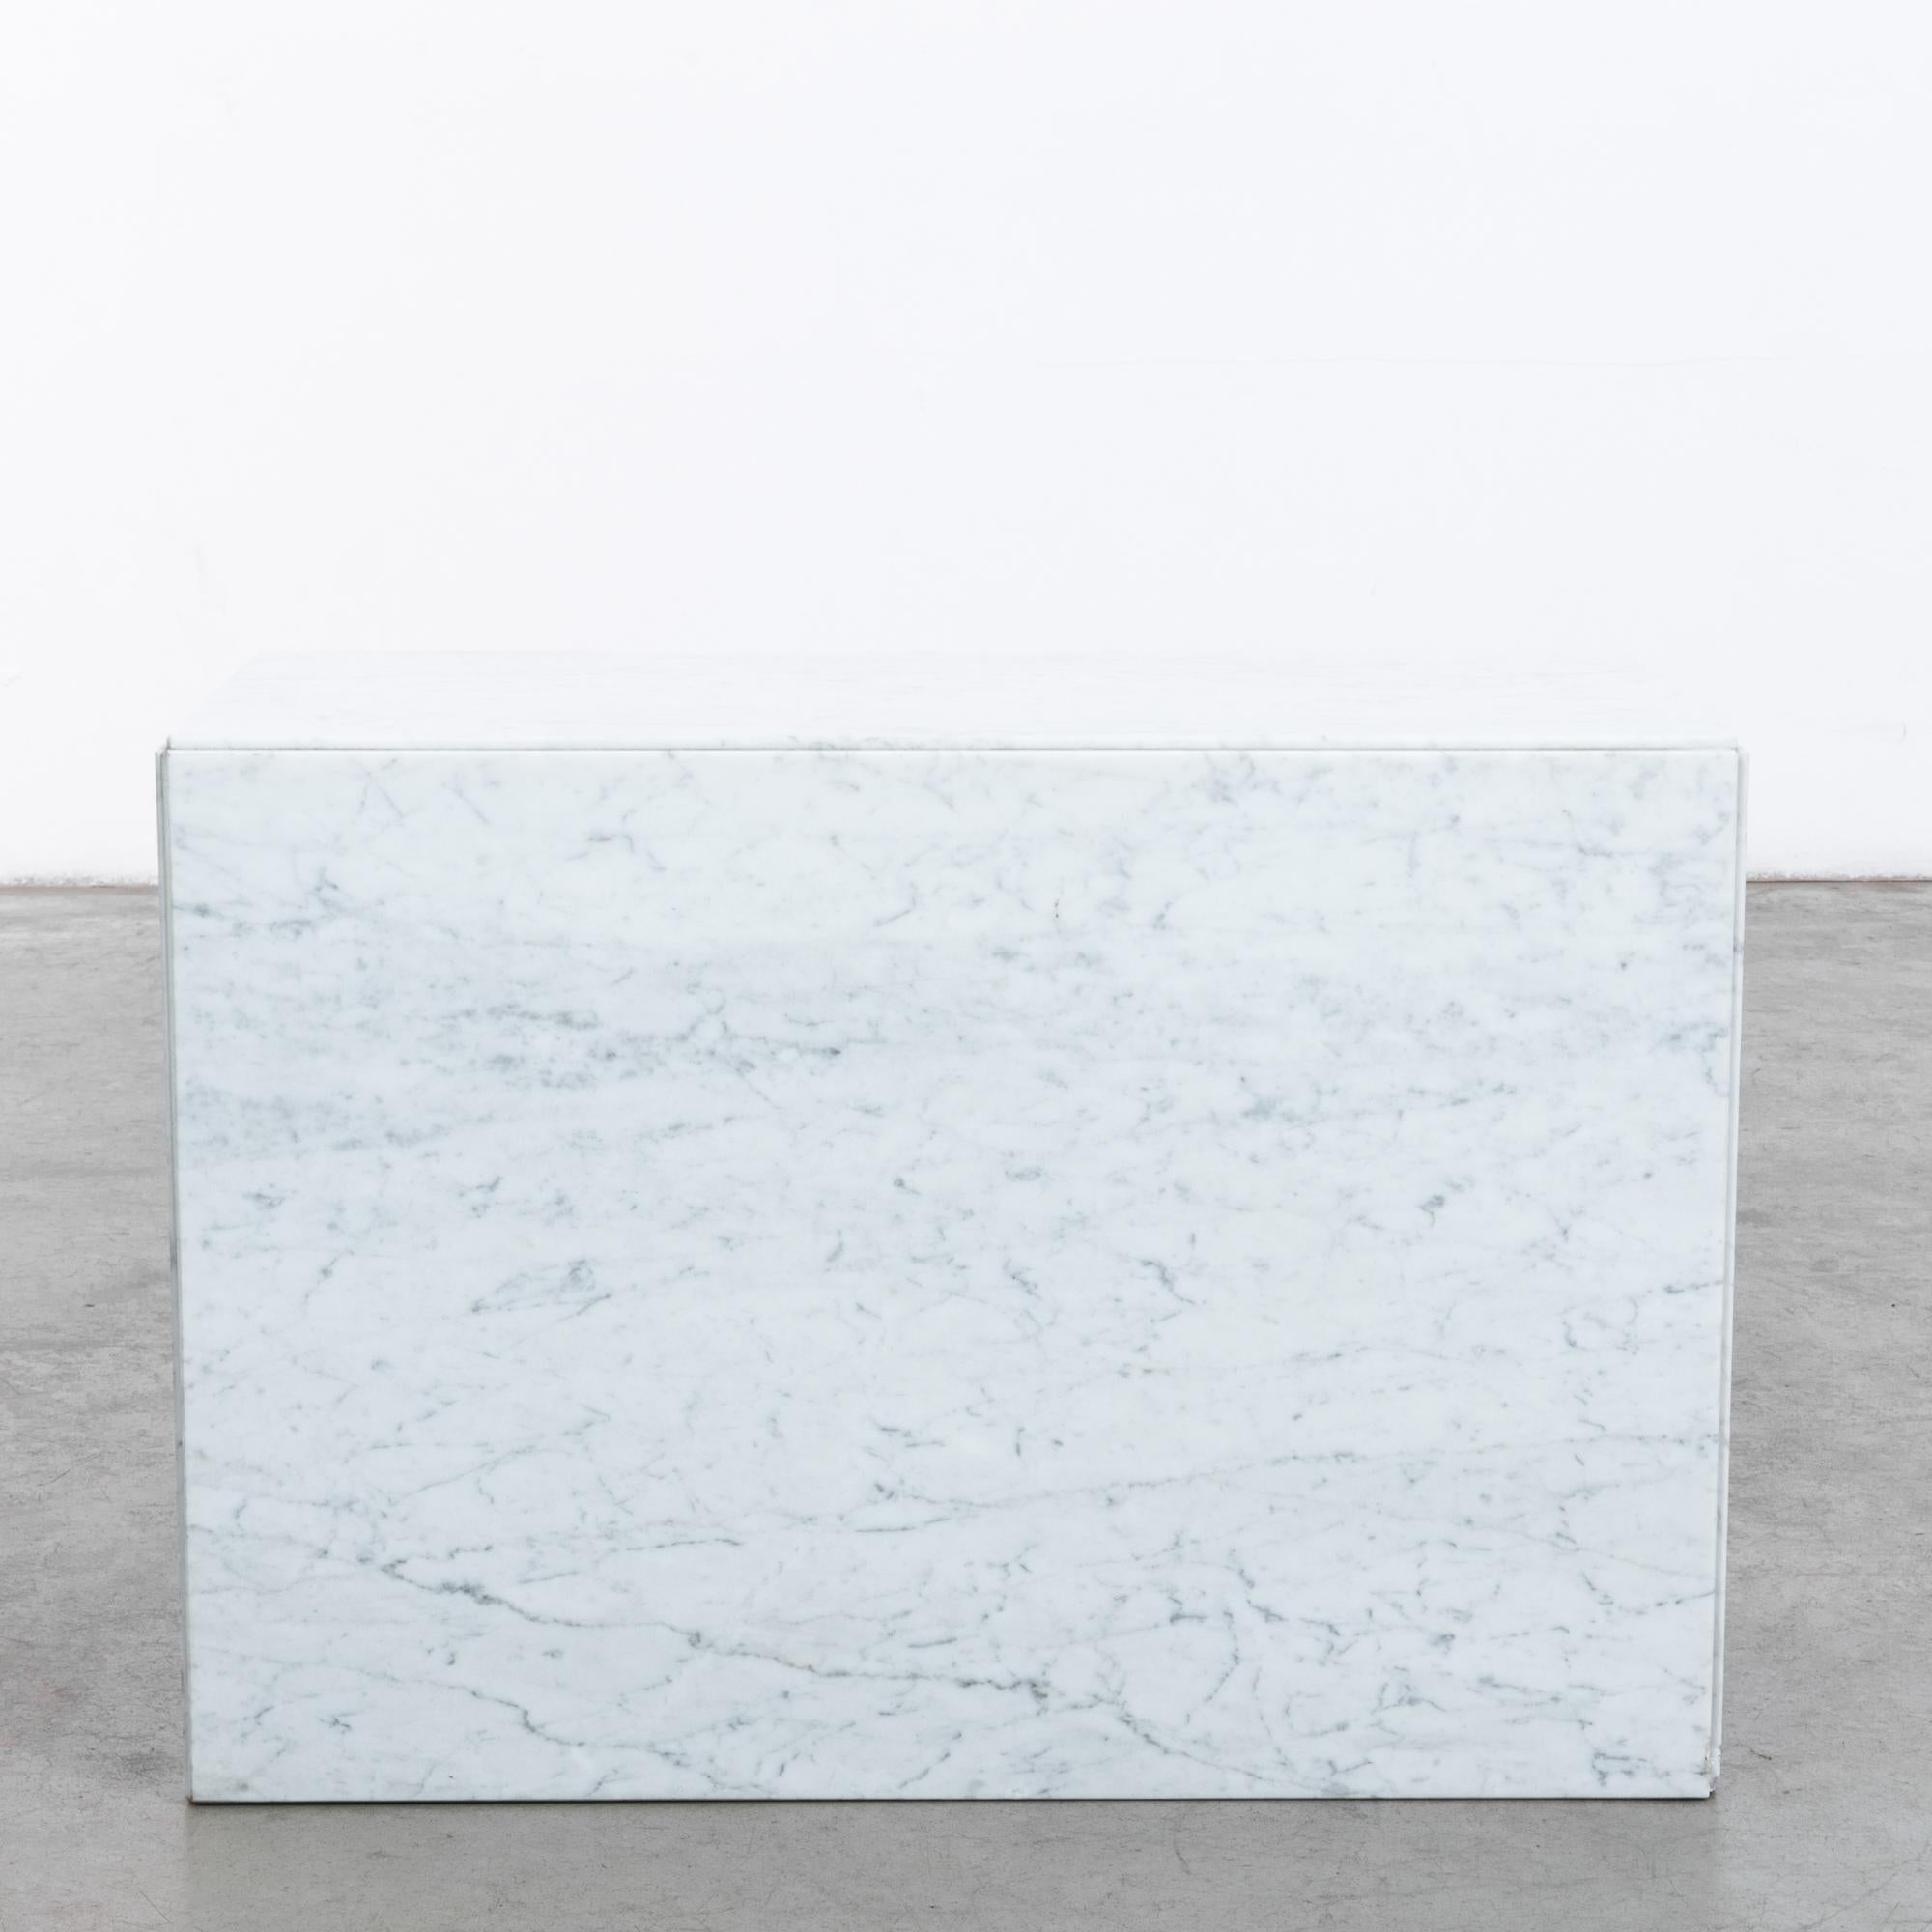 A marble coffee table from 1970s Italy. The solid block of the silhouette is articulated by the clean edges of the marble slabs. The cool color and nebulous veining of the polished surface gives a stylish inflection; the rich architectural history